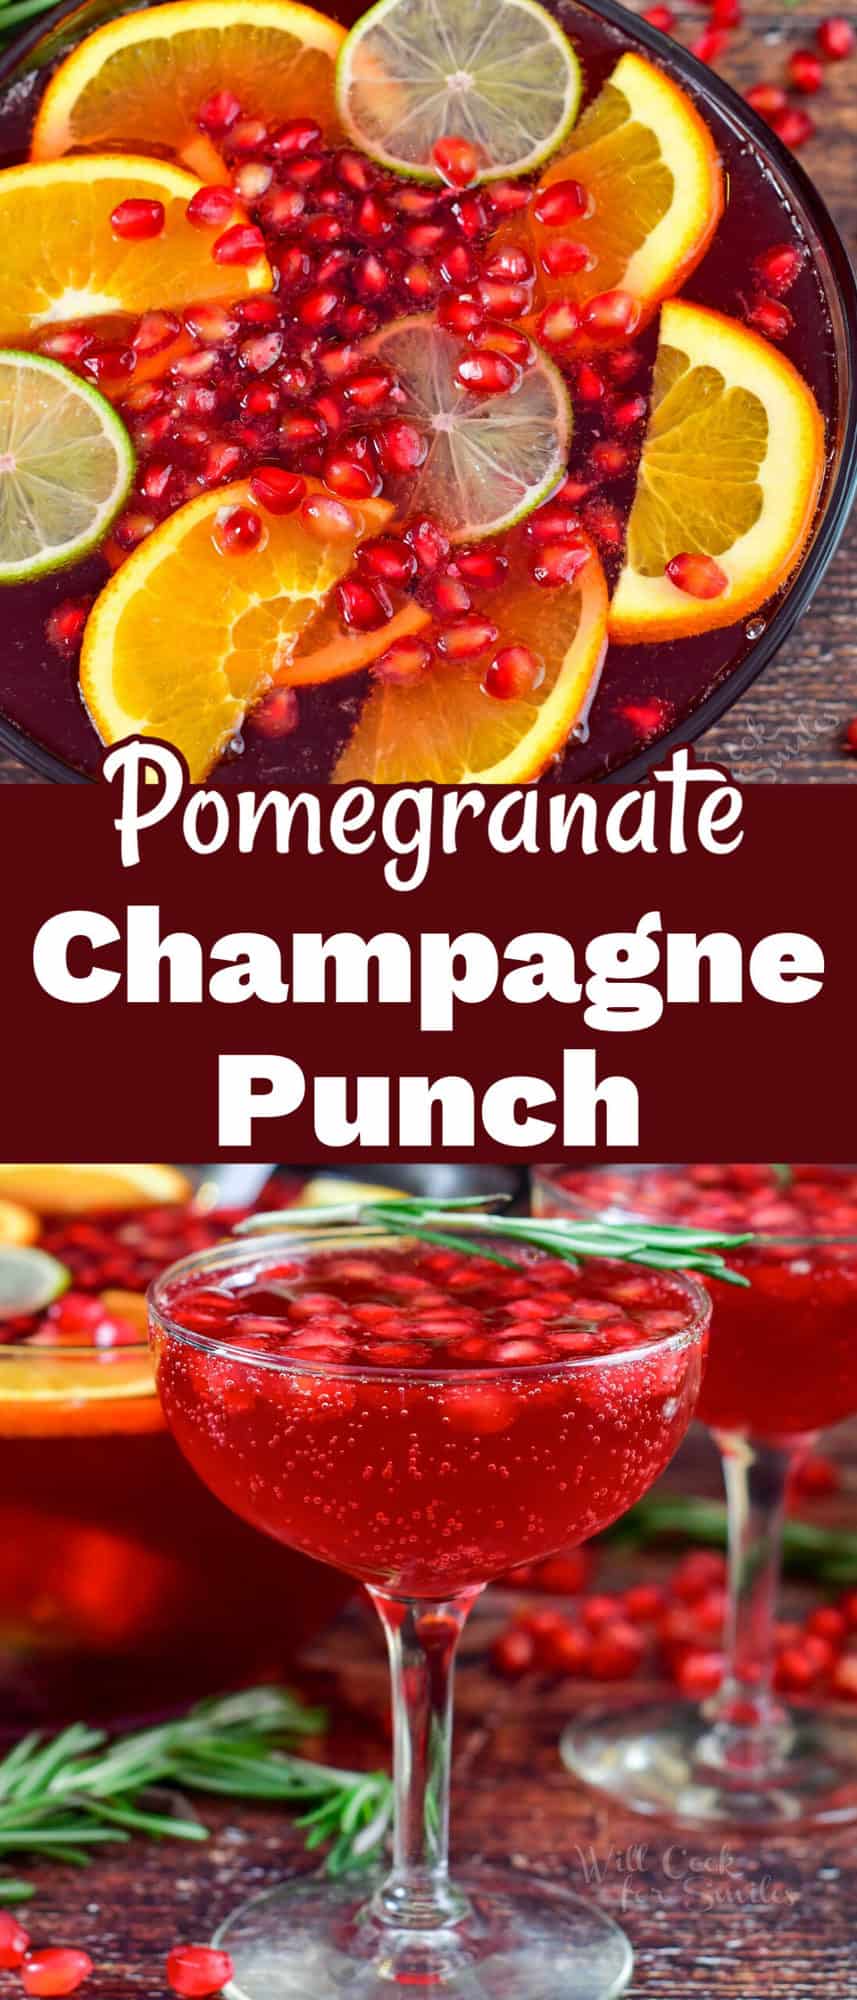 collage of two images of pomegranate champagne punch and title